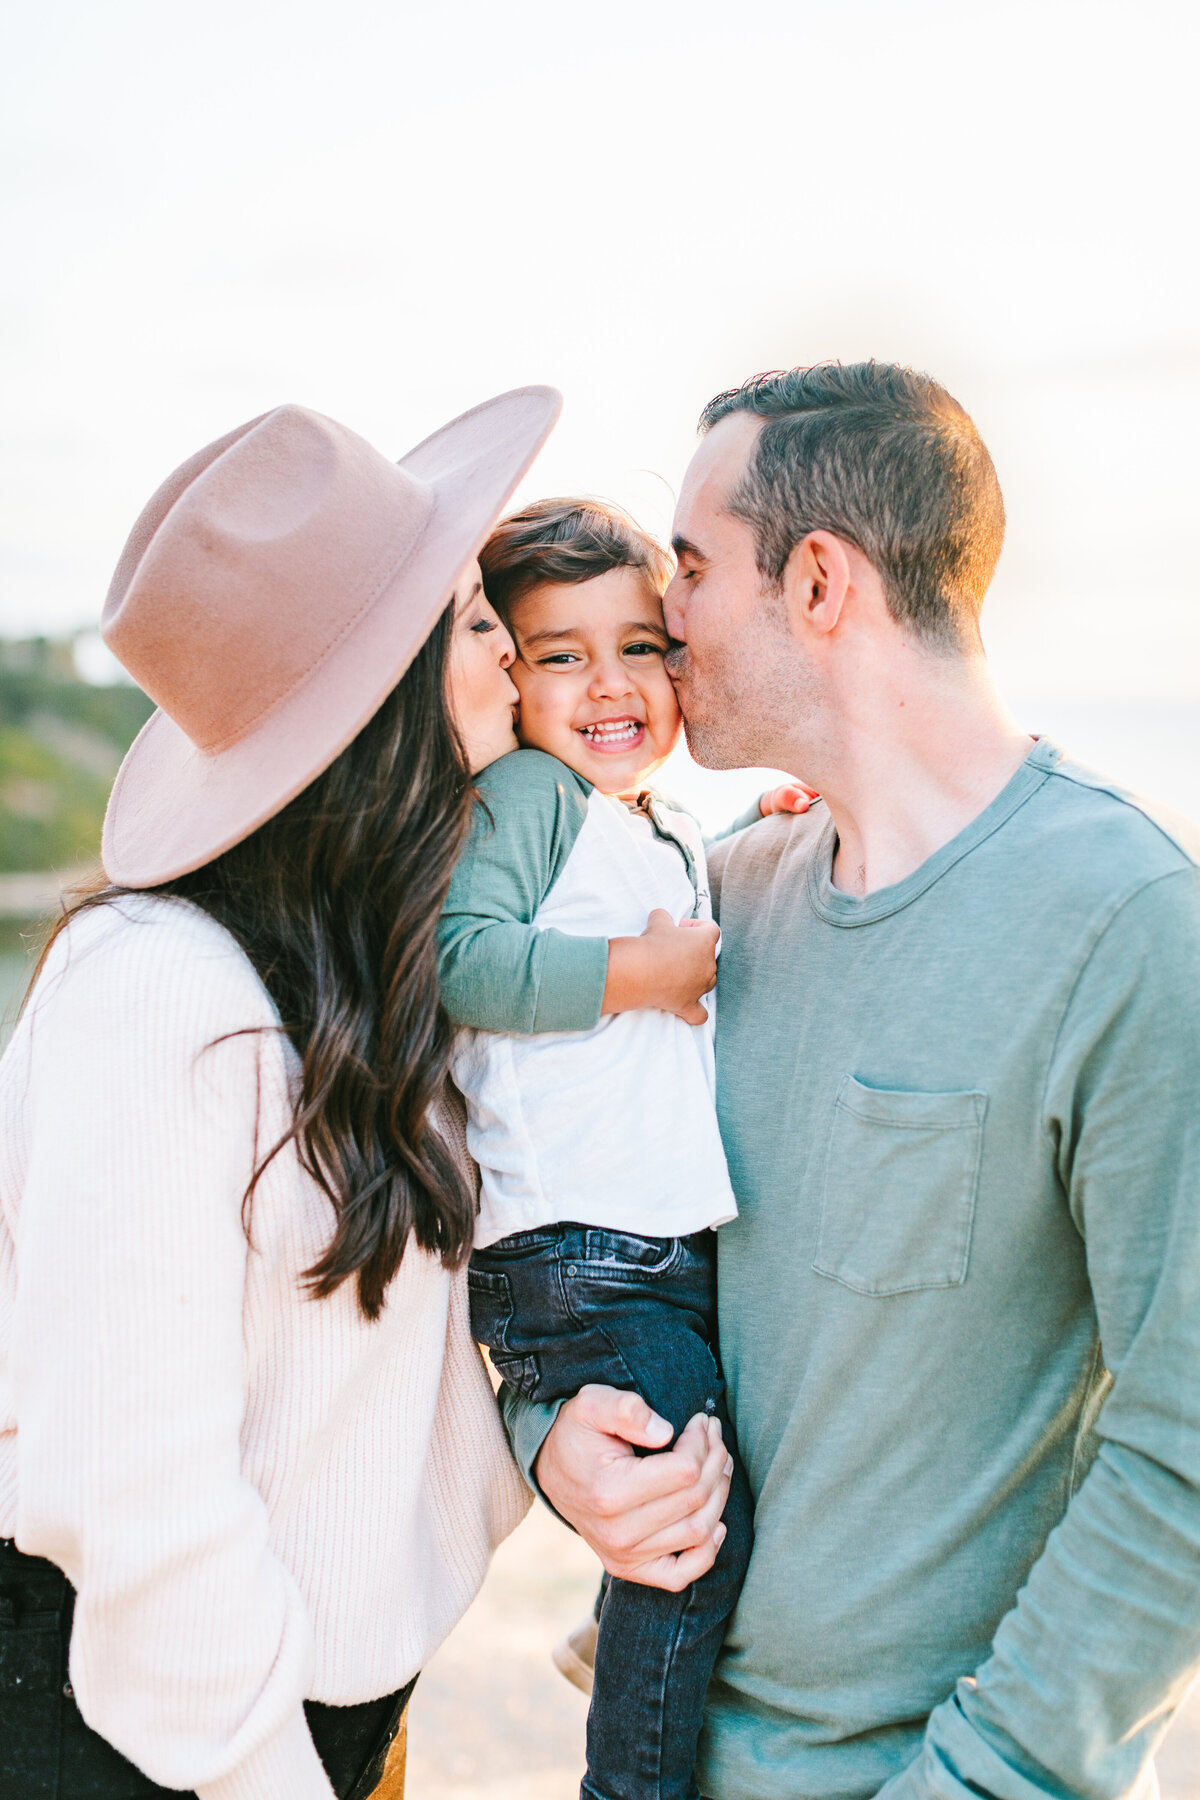 Best California and Texas Family Photographer-Jodee Debes Photography-28